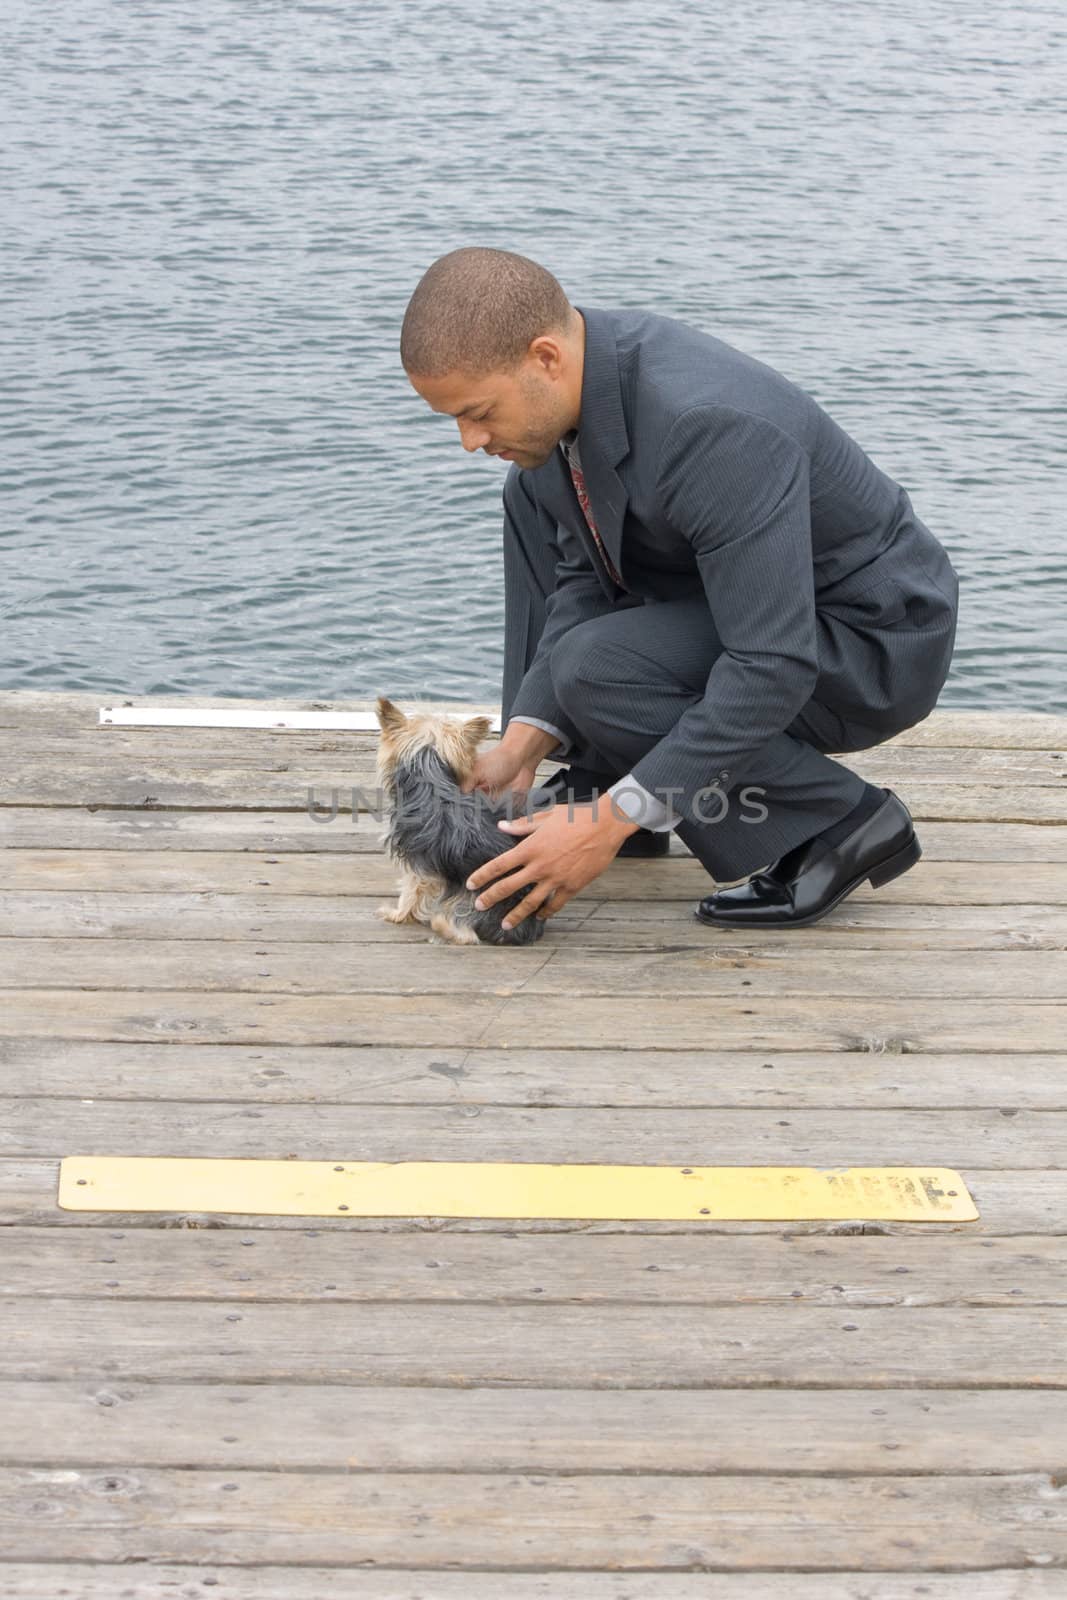 Ethnic Business Man with his Yorkshire Terrier Dog standing on a pier next to the lake.